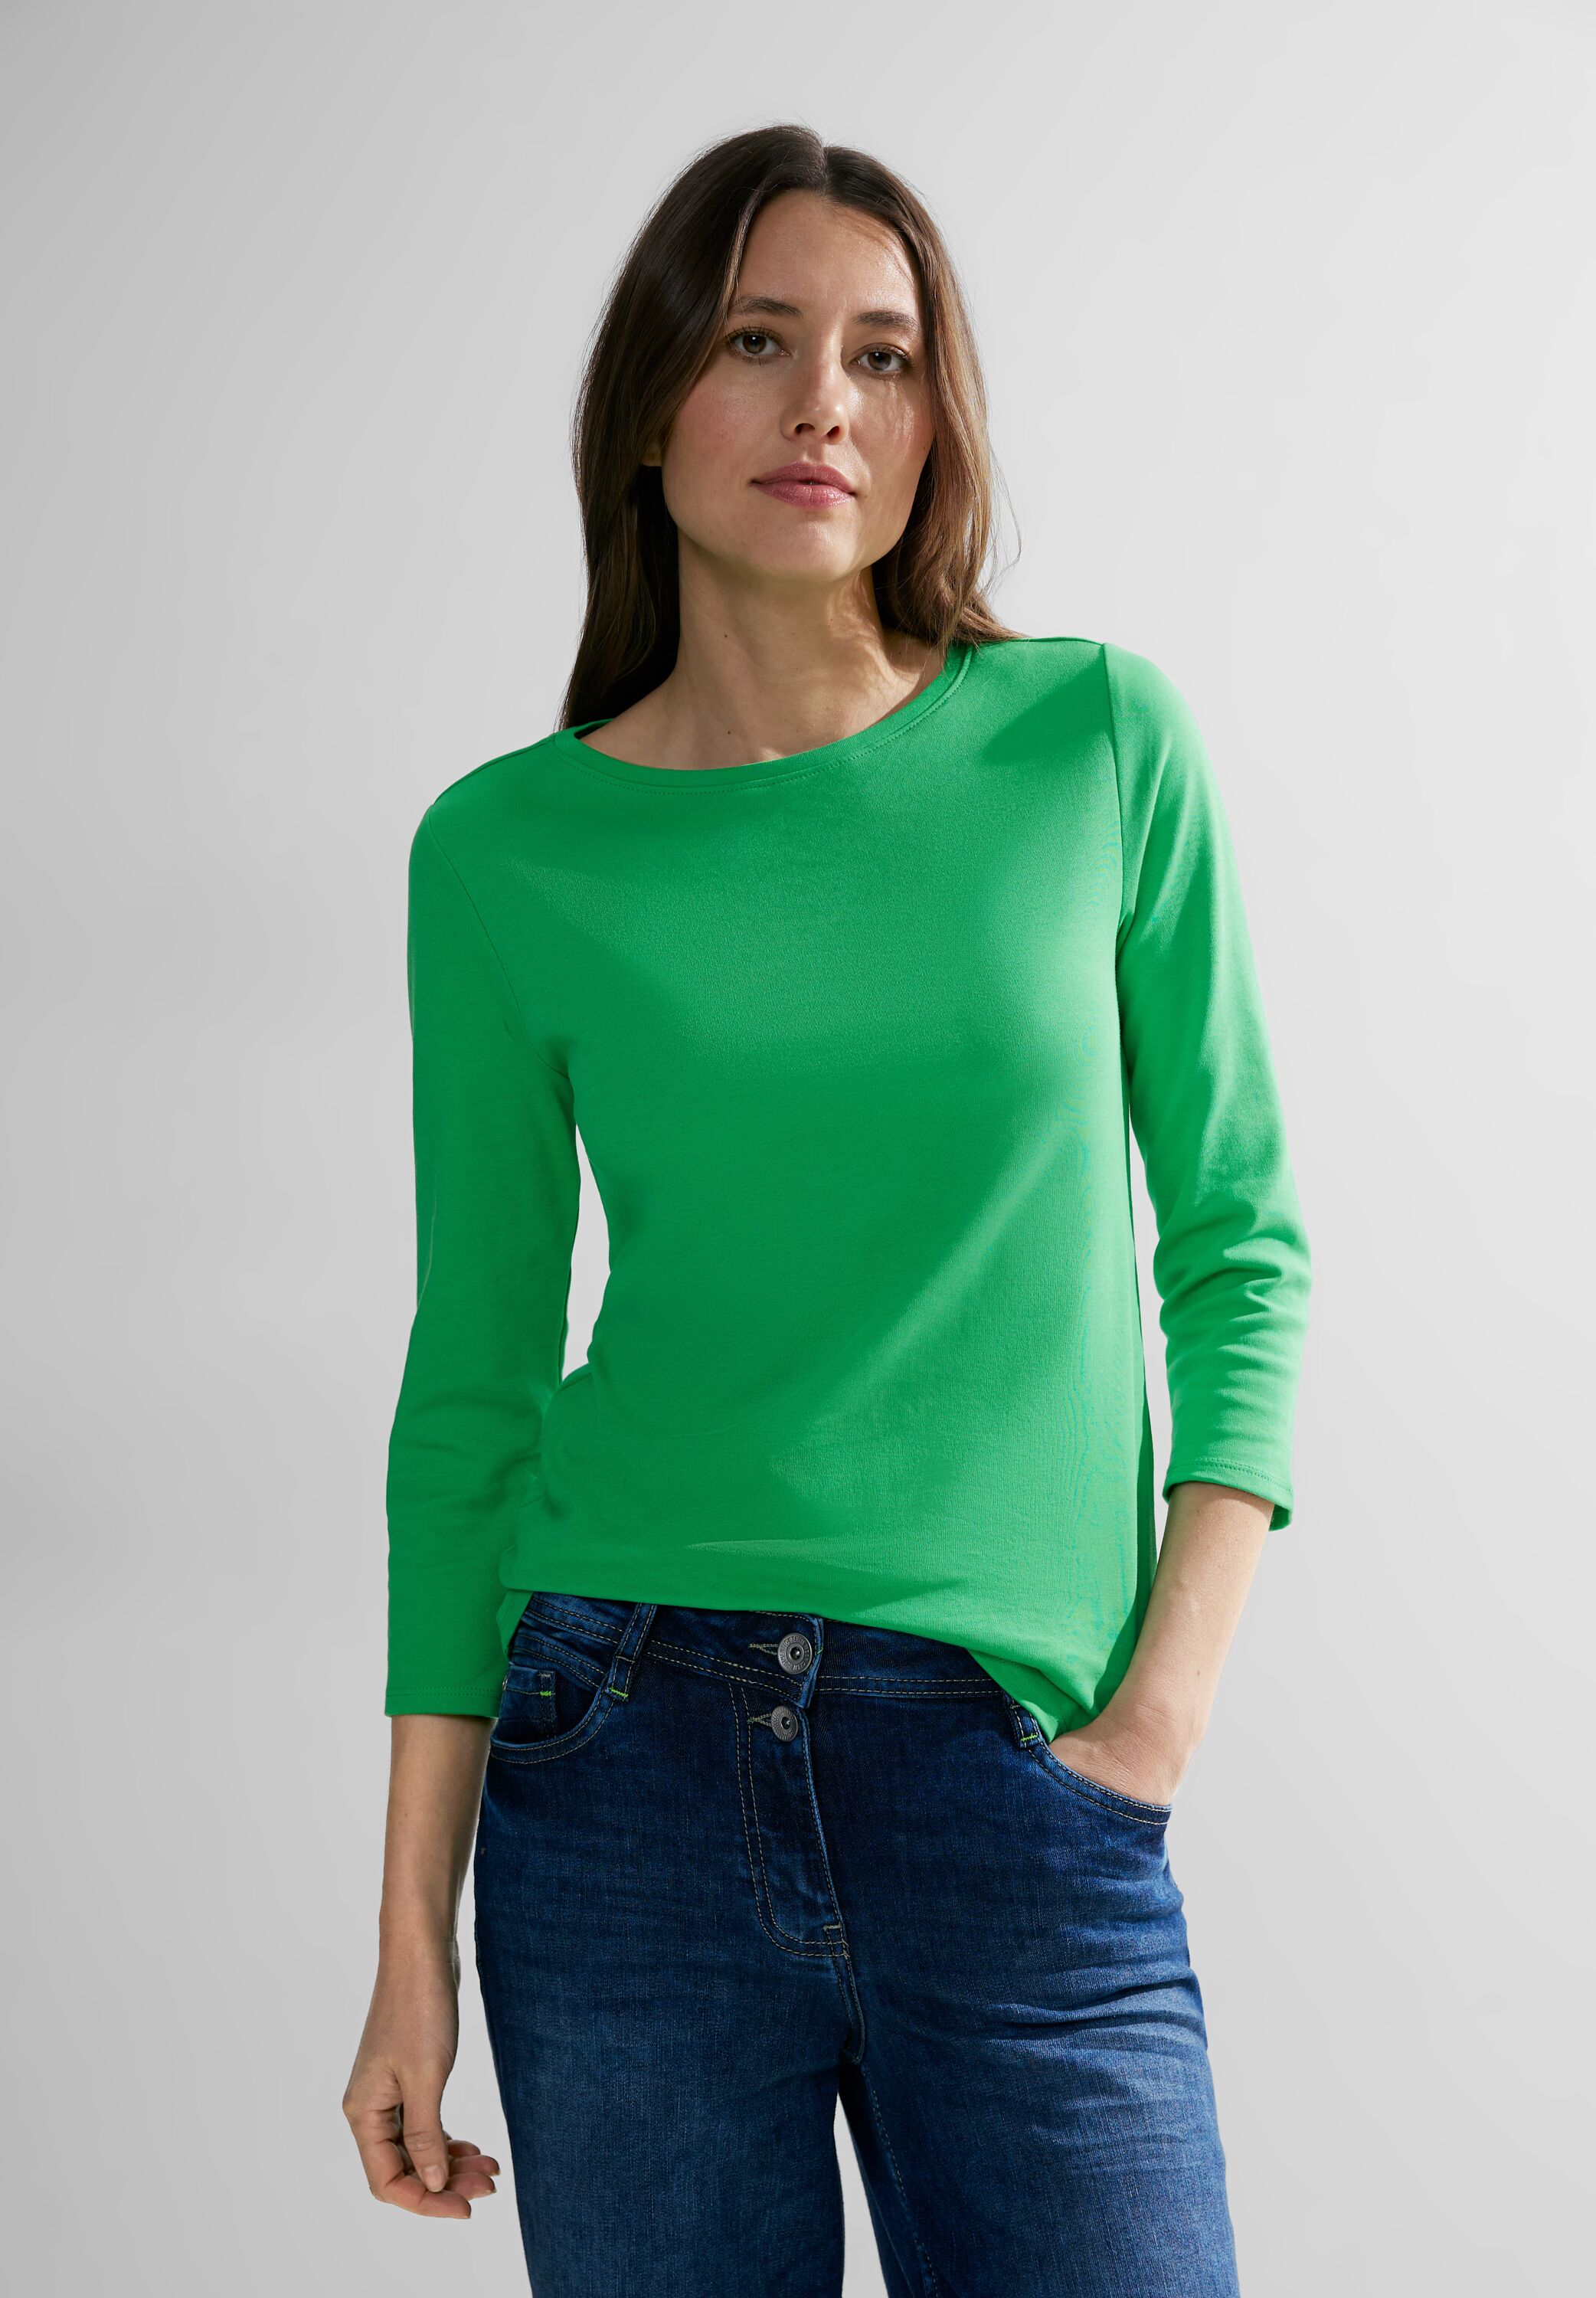 CECIL Shirt in Celery Green B317389-15455 - CONCEPT Mode